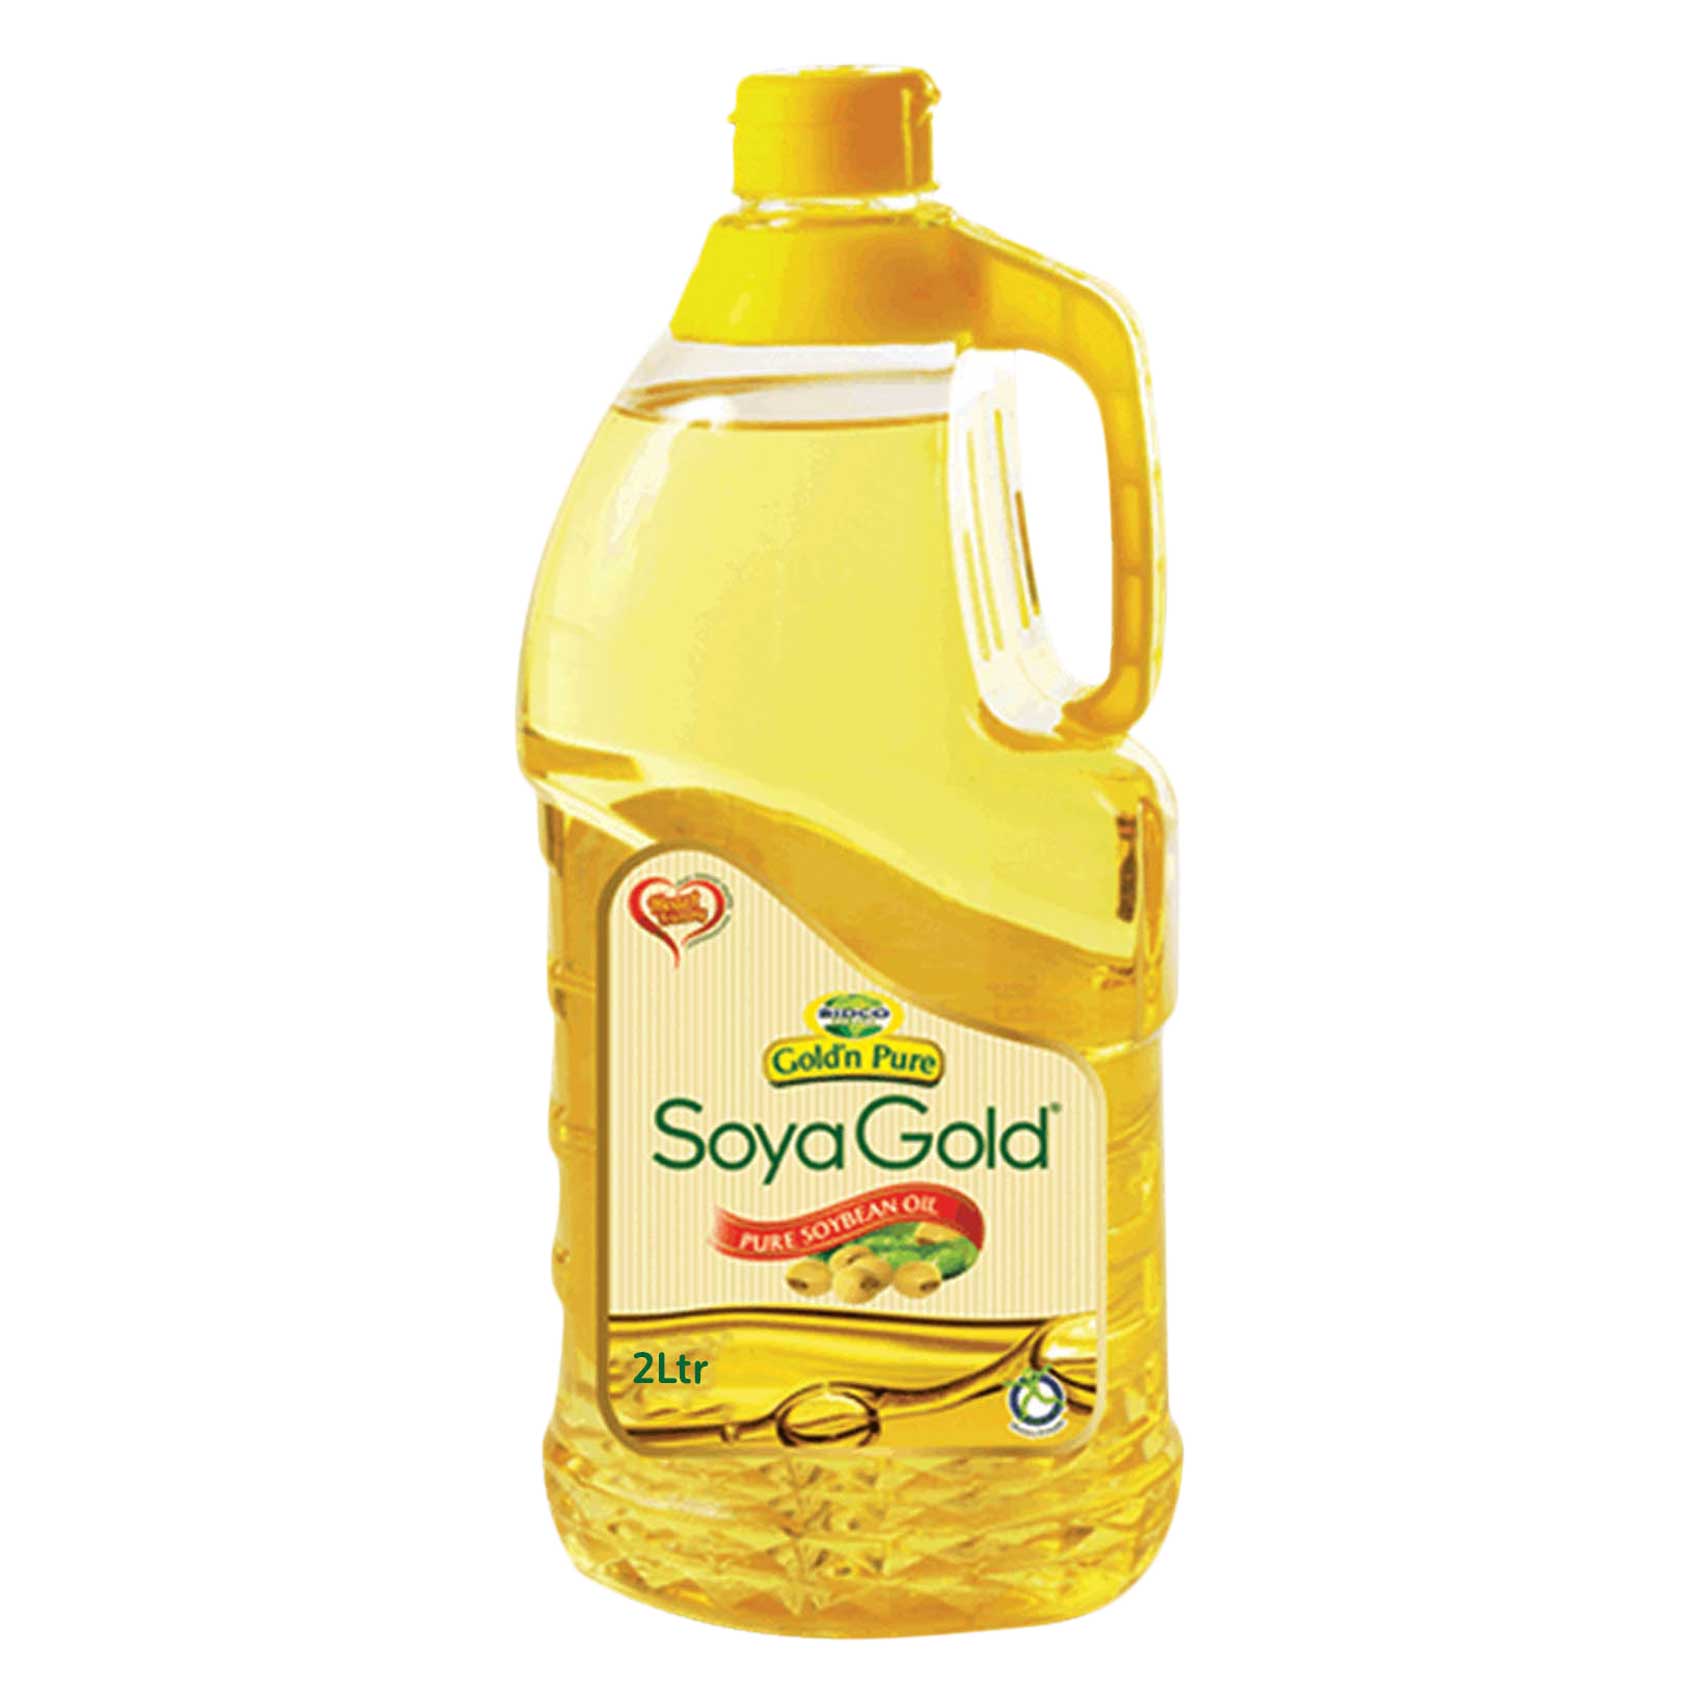 Goldn Pure Soya Gold Soybean Oil 2L